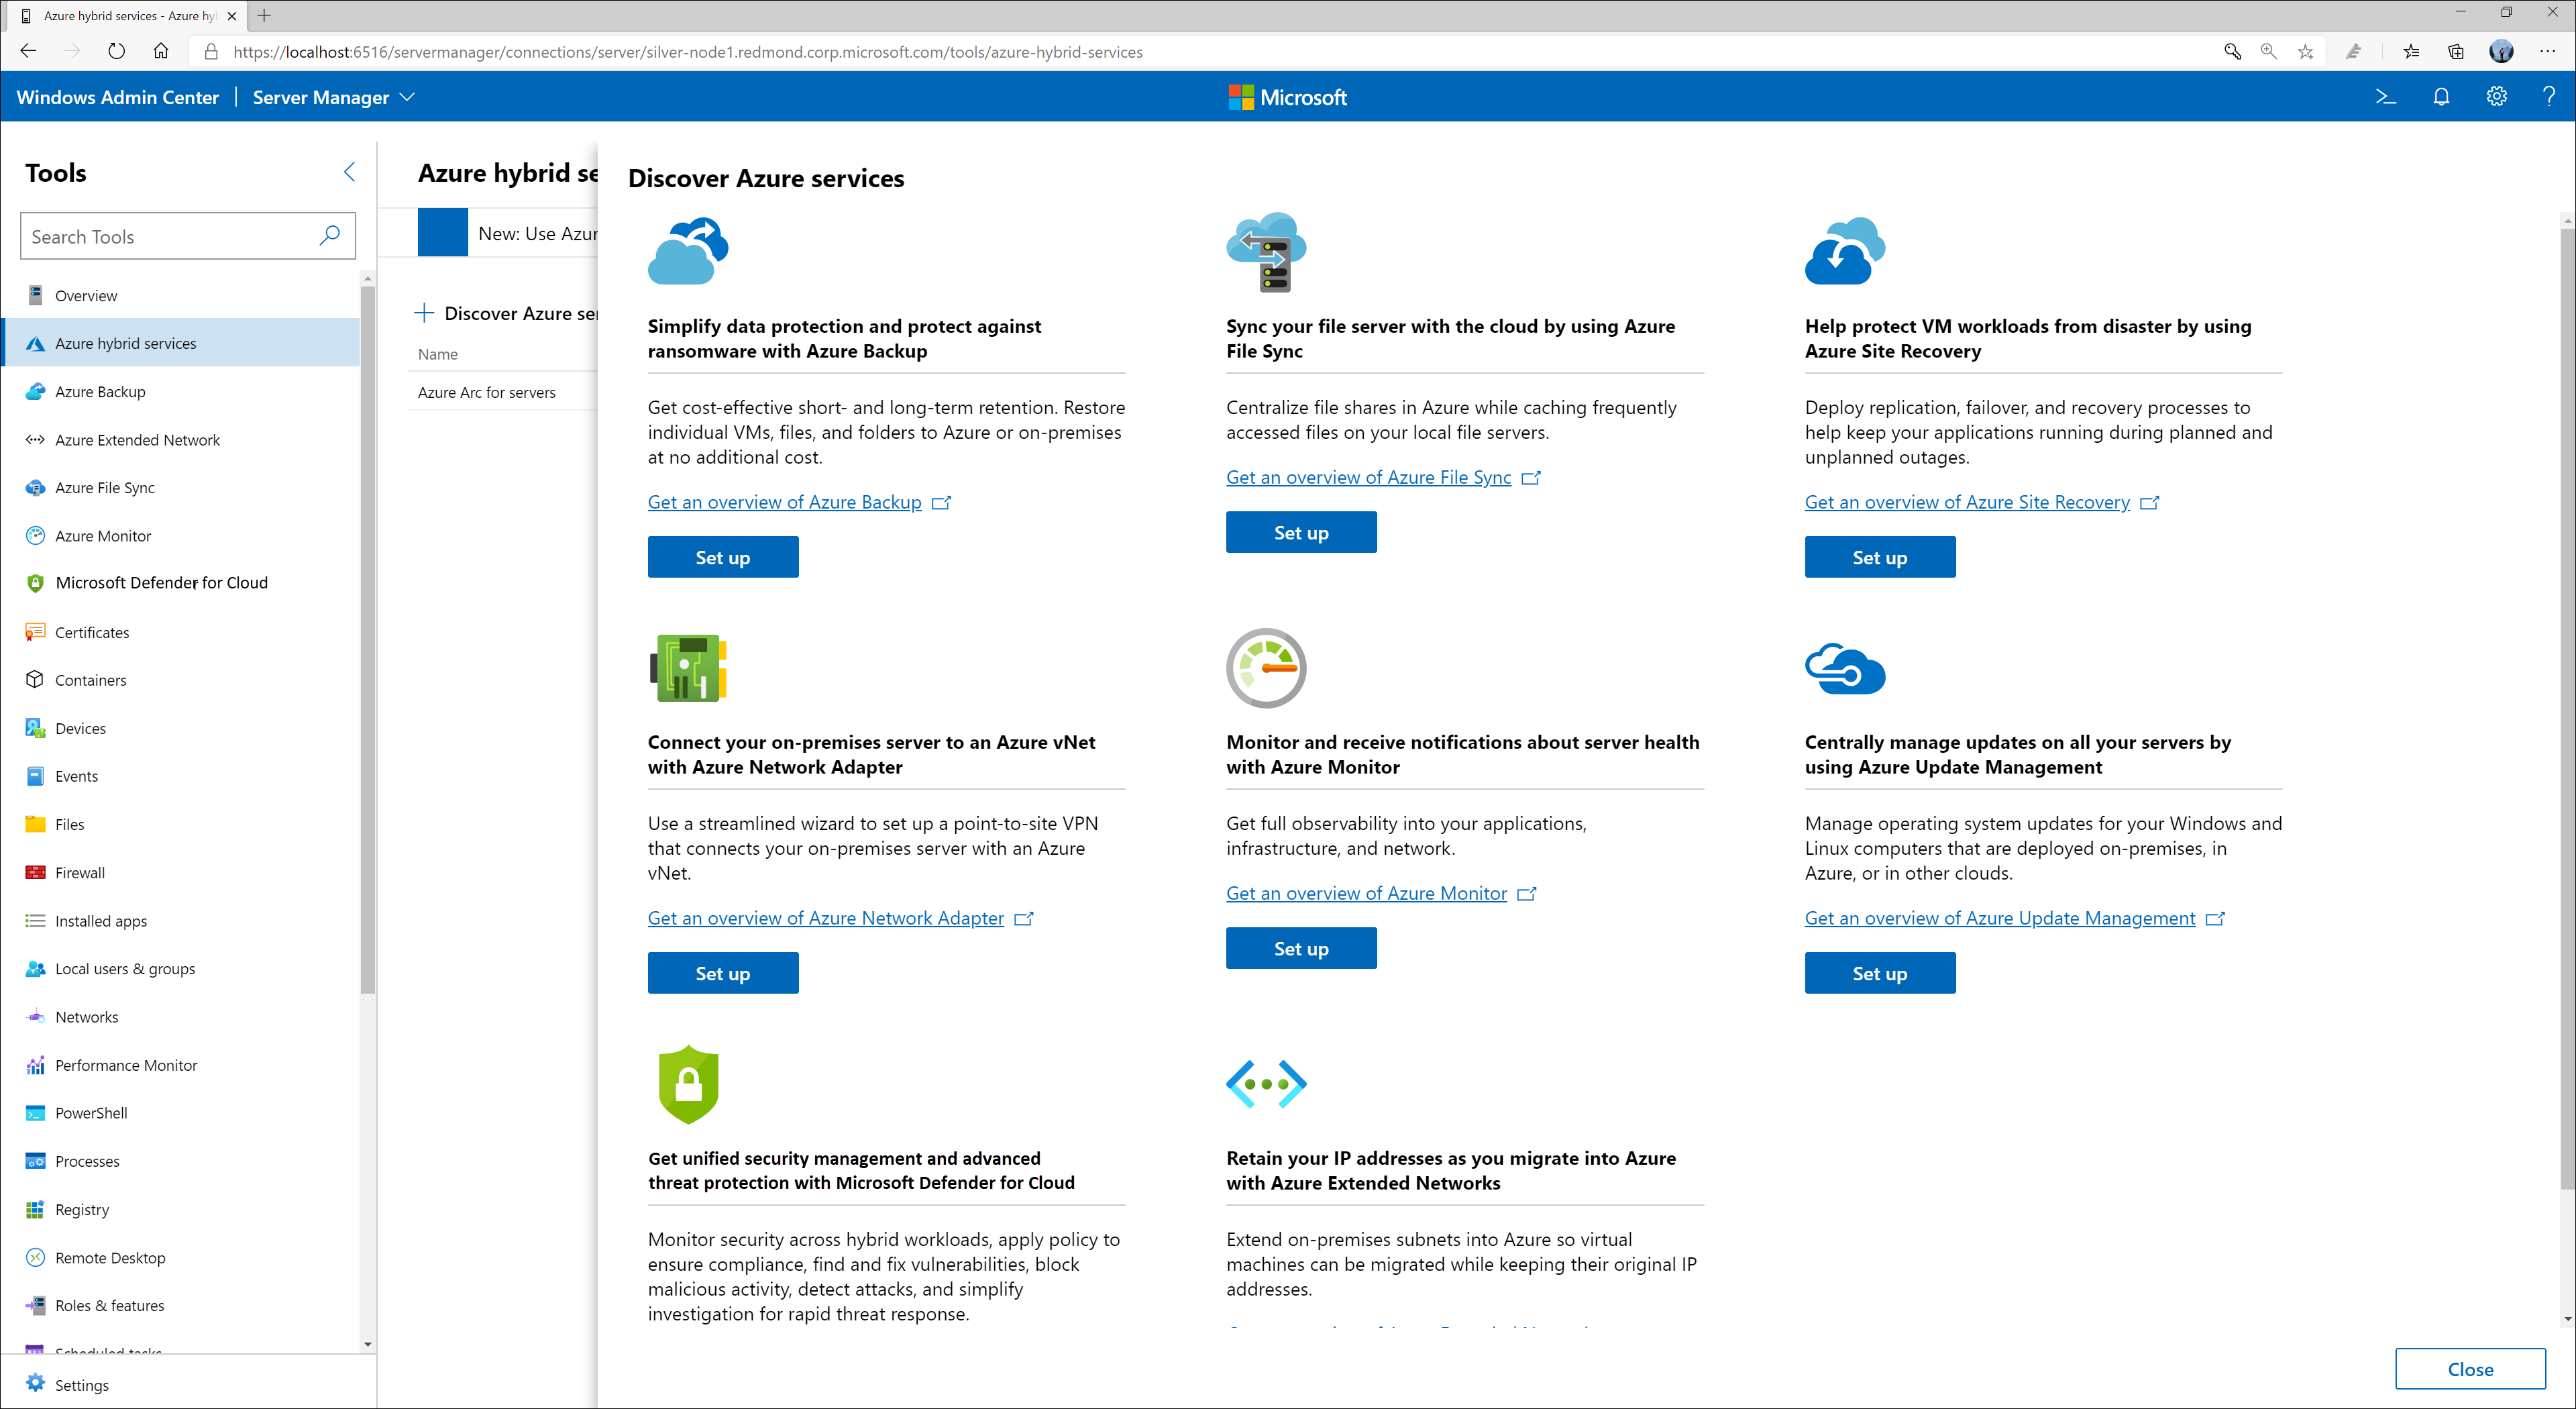 Windows Admin Center provides a centralized location of all the integrated Azure services. You can use the Azure hybrid services tool to manage the hybrid features of VMs in Azure and on-premises.